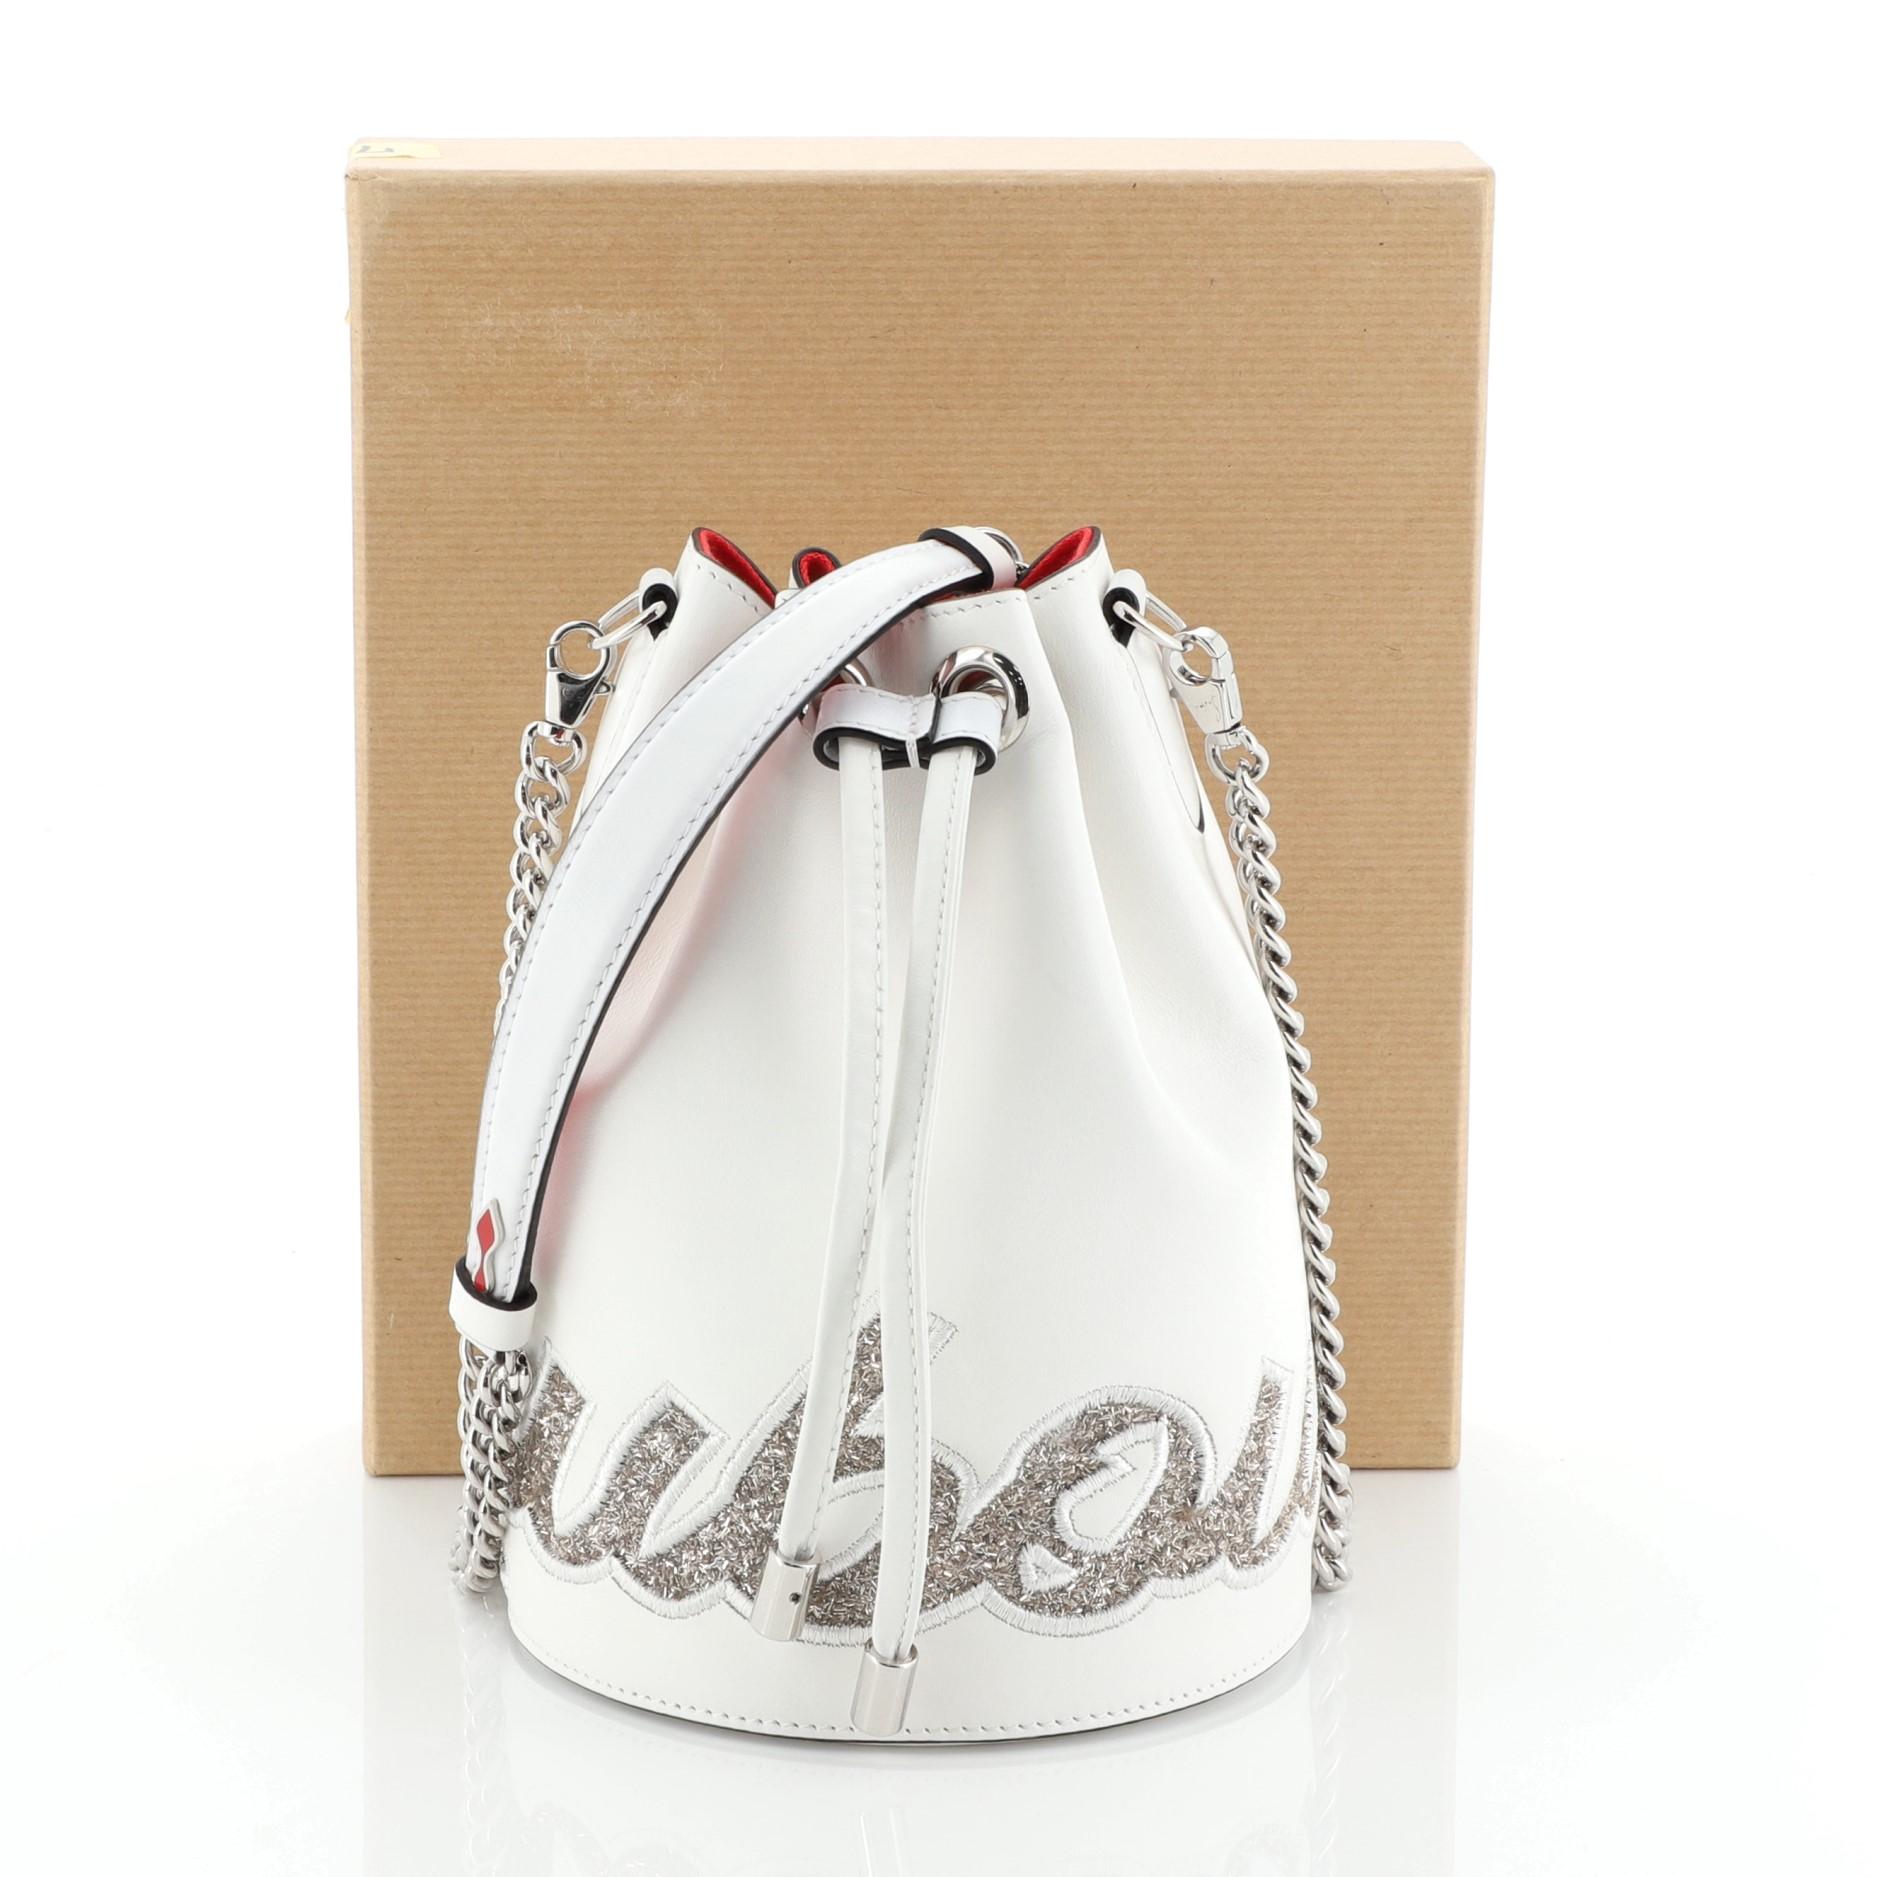 This Christian Louboutin Marie Jane Bucket Bag Leather Medium, crafted in white leather, features chain-link and leather strap, signature Louboutin logo in frosted glitter and silver-tone hardware. Its drawstring closure opens to a red fabric